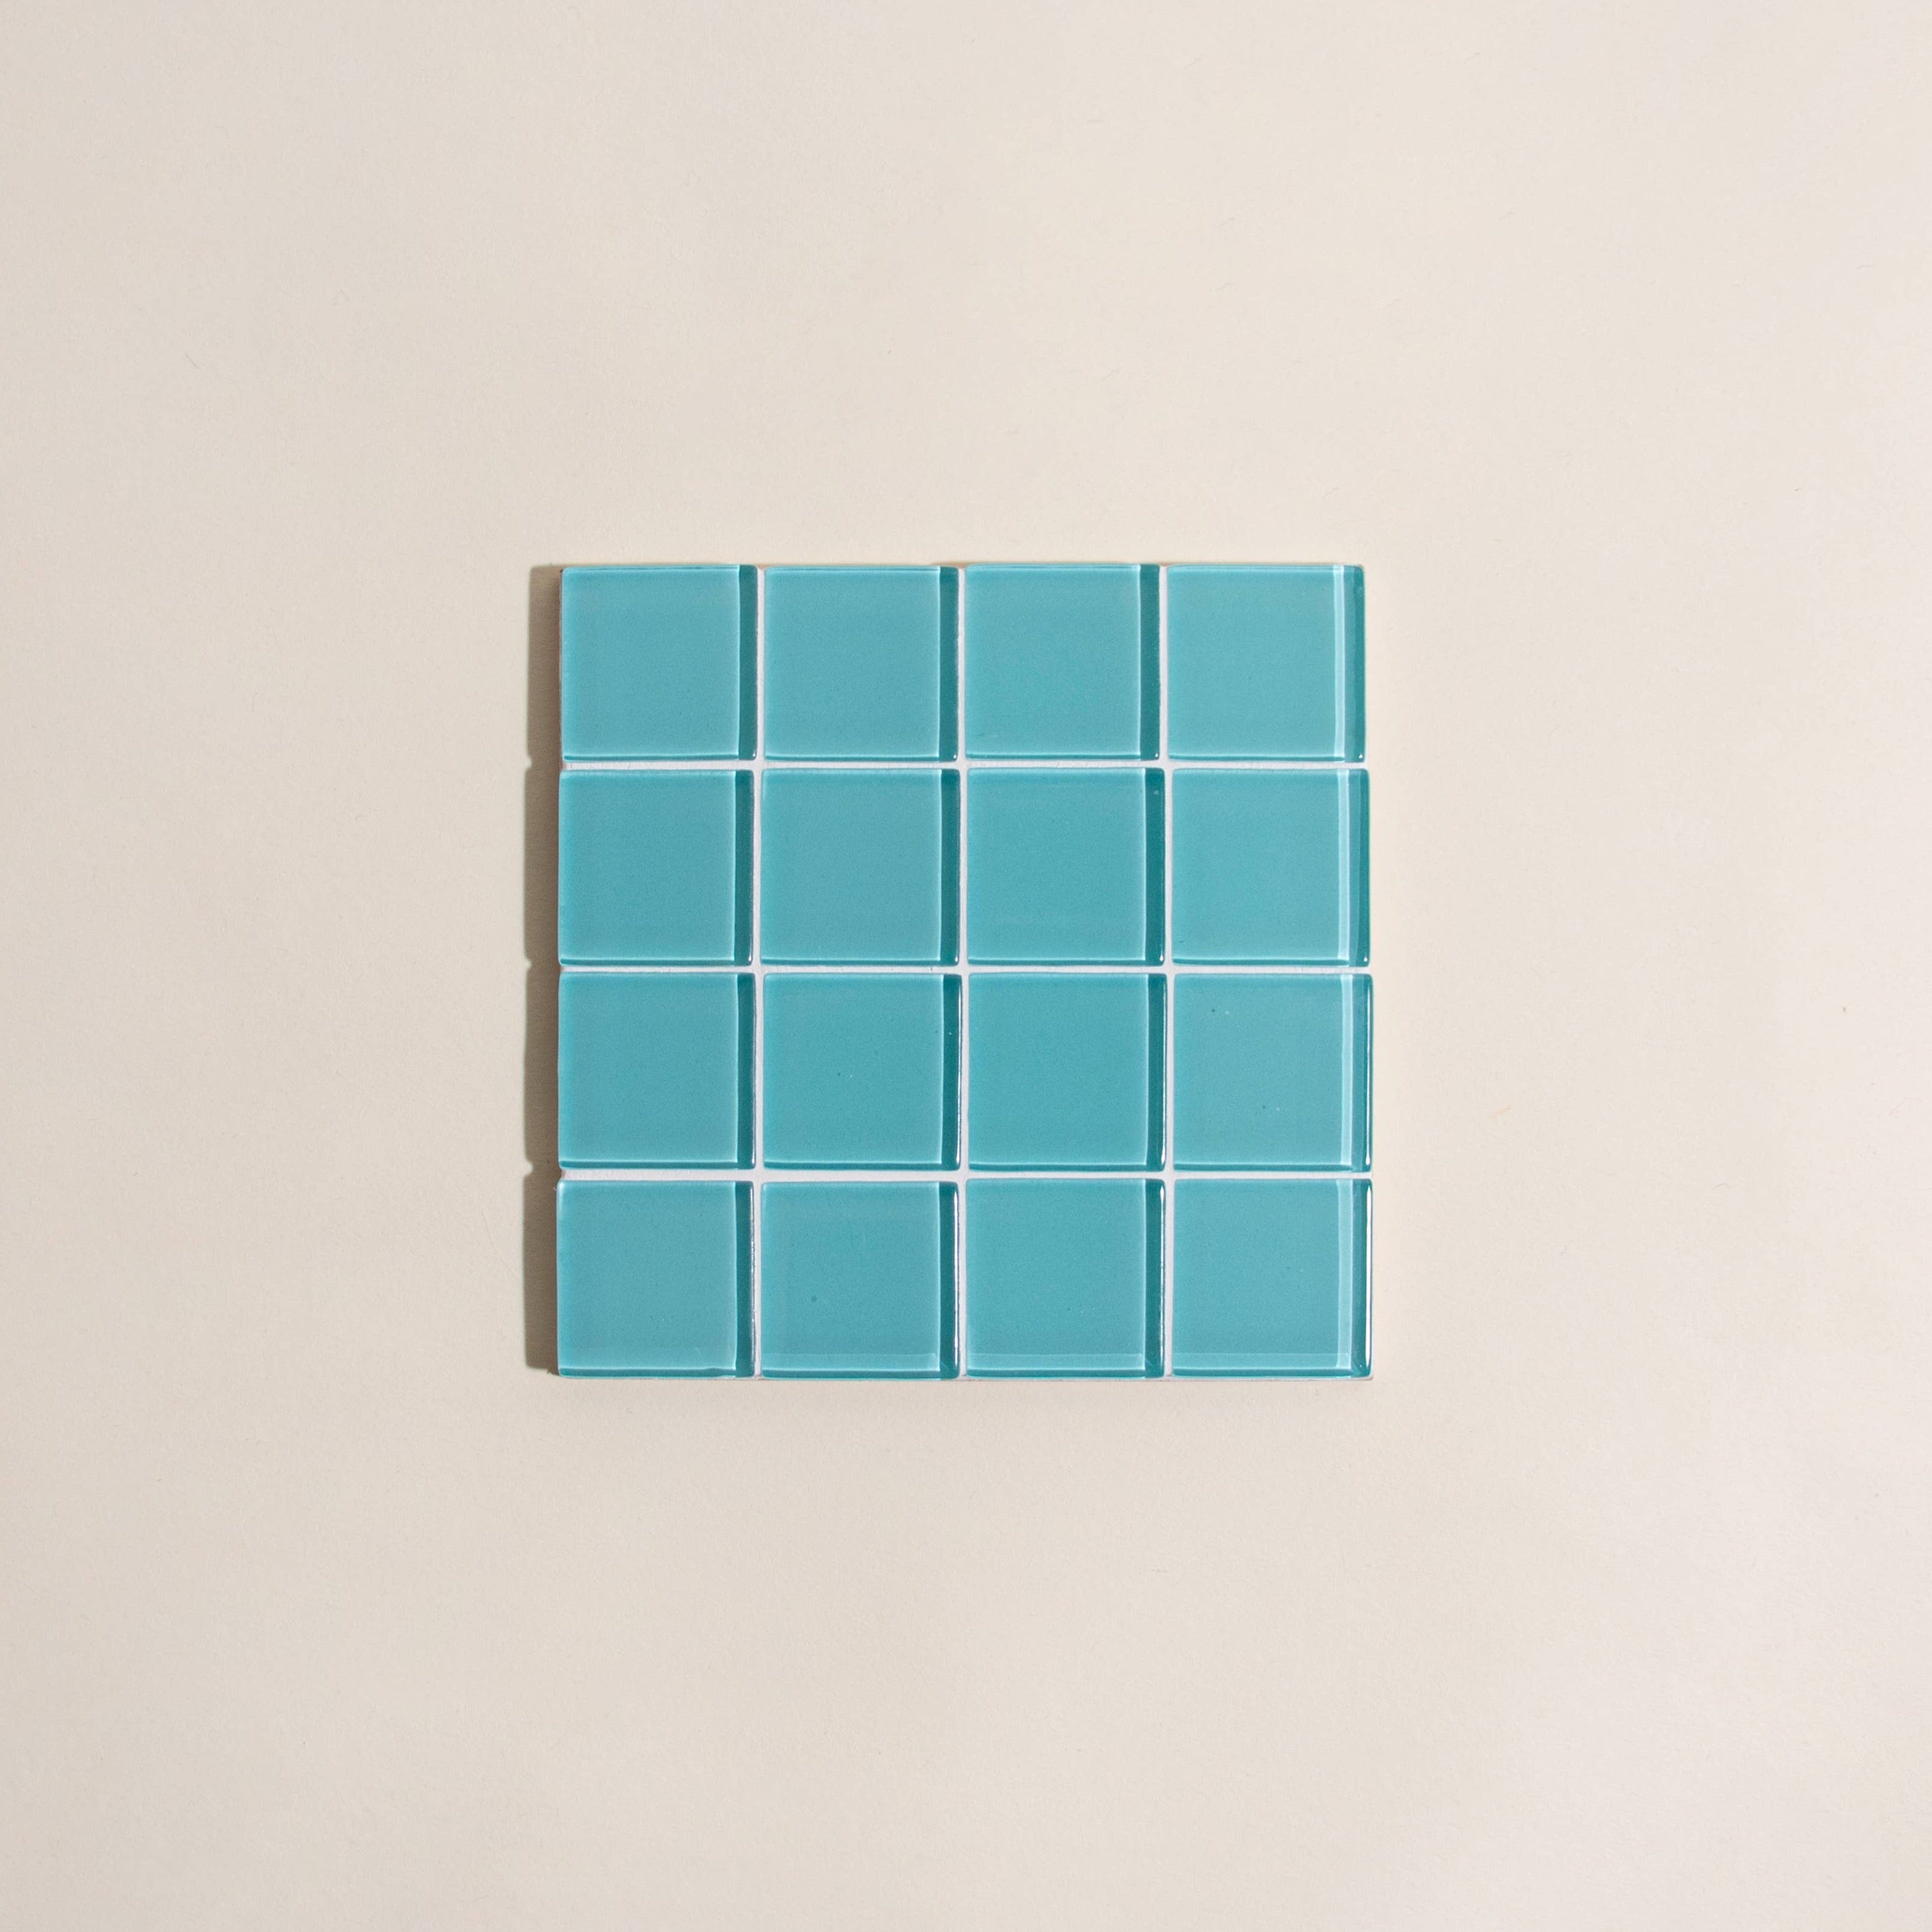 GLASS TILE COASTER - Breakfast at Tiffany's by Subtle Art Studios